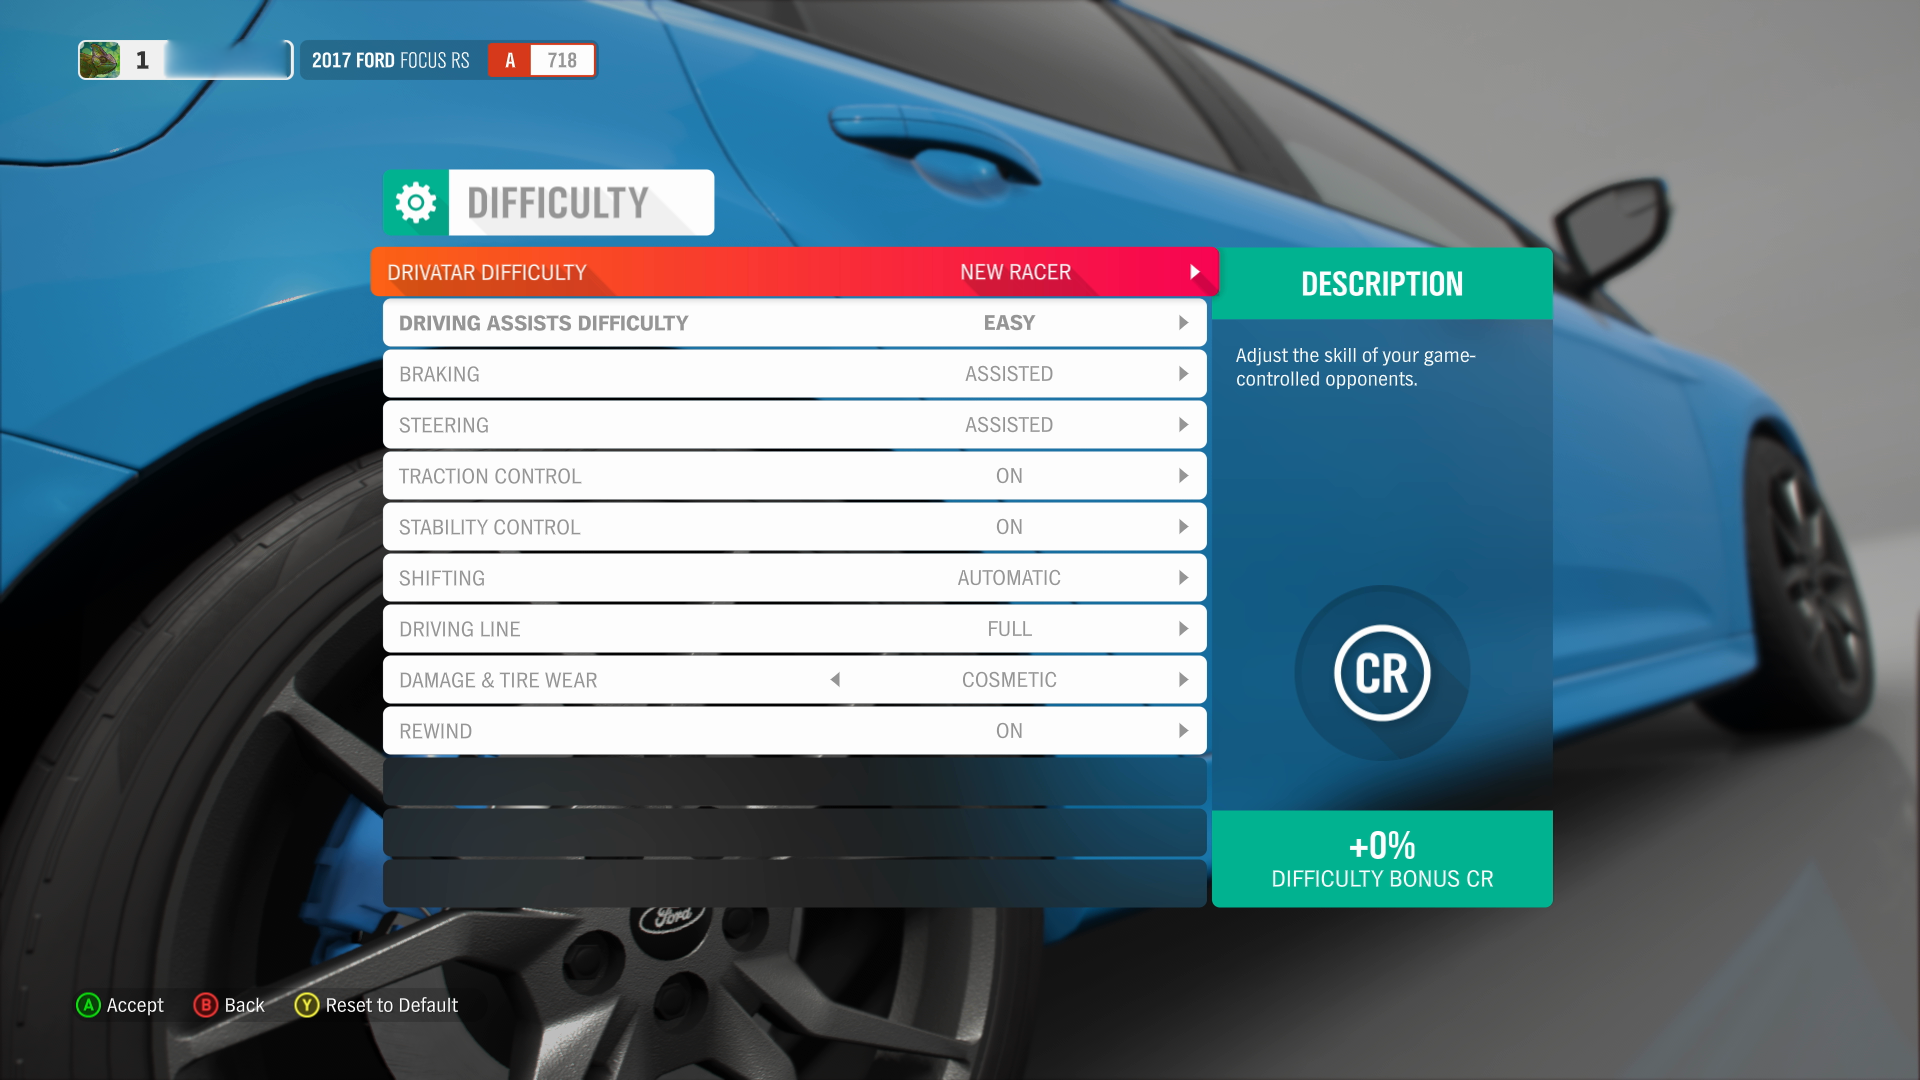 The Forza Horizon 4 difficulty settings menu. There are 9 items arranged in a single vertical column.